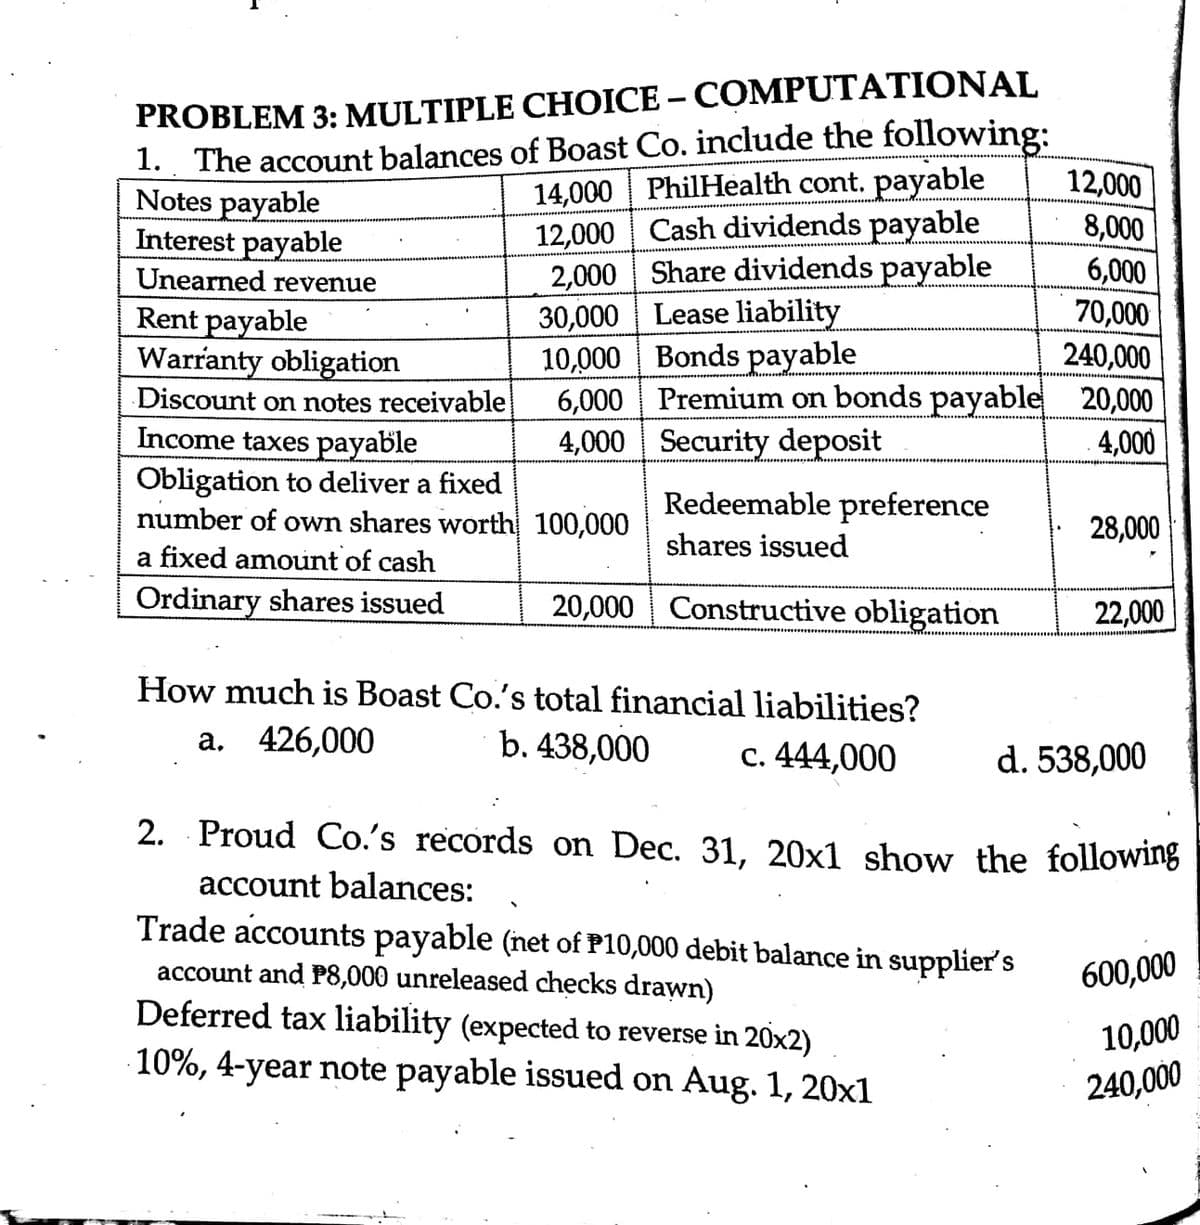 PROBLEM 3: MULTIPLE CHOICE – COMPUTATIONAL
1. The account balances of Boast Co. include the following:
Notes payable
Interest payable
14,000 PhilHealth cont. payable
12,000 Cash dividends payable
2,000 Share dividends payable
30,000 Lease liability
10,000 Bonds payable
6,000 Premium on bonds payable 20,000
4,000 Security deposit
12,000
8,000
6,000
70,000
240,000
Unearned revenue
Rent payable
Warranty obligation
Discount on notes receivable
Income taxes payable
Obligation to deliver a fixed
number of own shares worth 100,000
a fixed amount of cash
Ordinary shares issued
4,000
Redeemable preference
28,000
shares issued
20,000 Constructive obligation
22,000
How much is Boast Co.'s total financial liabilities?
а. 426,000
b. 438,000
c. 444,000
d. 538,000
2. Proud Co.'s records on Dec. 31, 20x1 show the following
account balances:
Trade accounts payable (net of P10,000 debit balance in supplier's
account and P8,000 unreleased checks drawn)
Deferred tax liability (expected to reverse in 20x2)
10%, 4-year note payable issued on Aug. 1, 20x1
600,000
10,000
240,000
